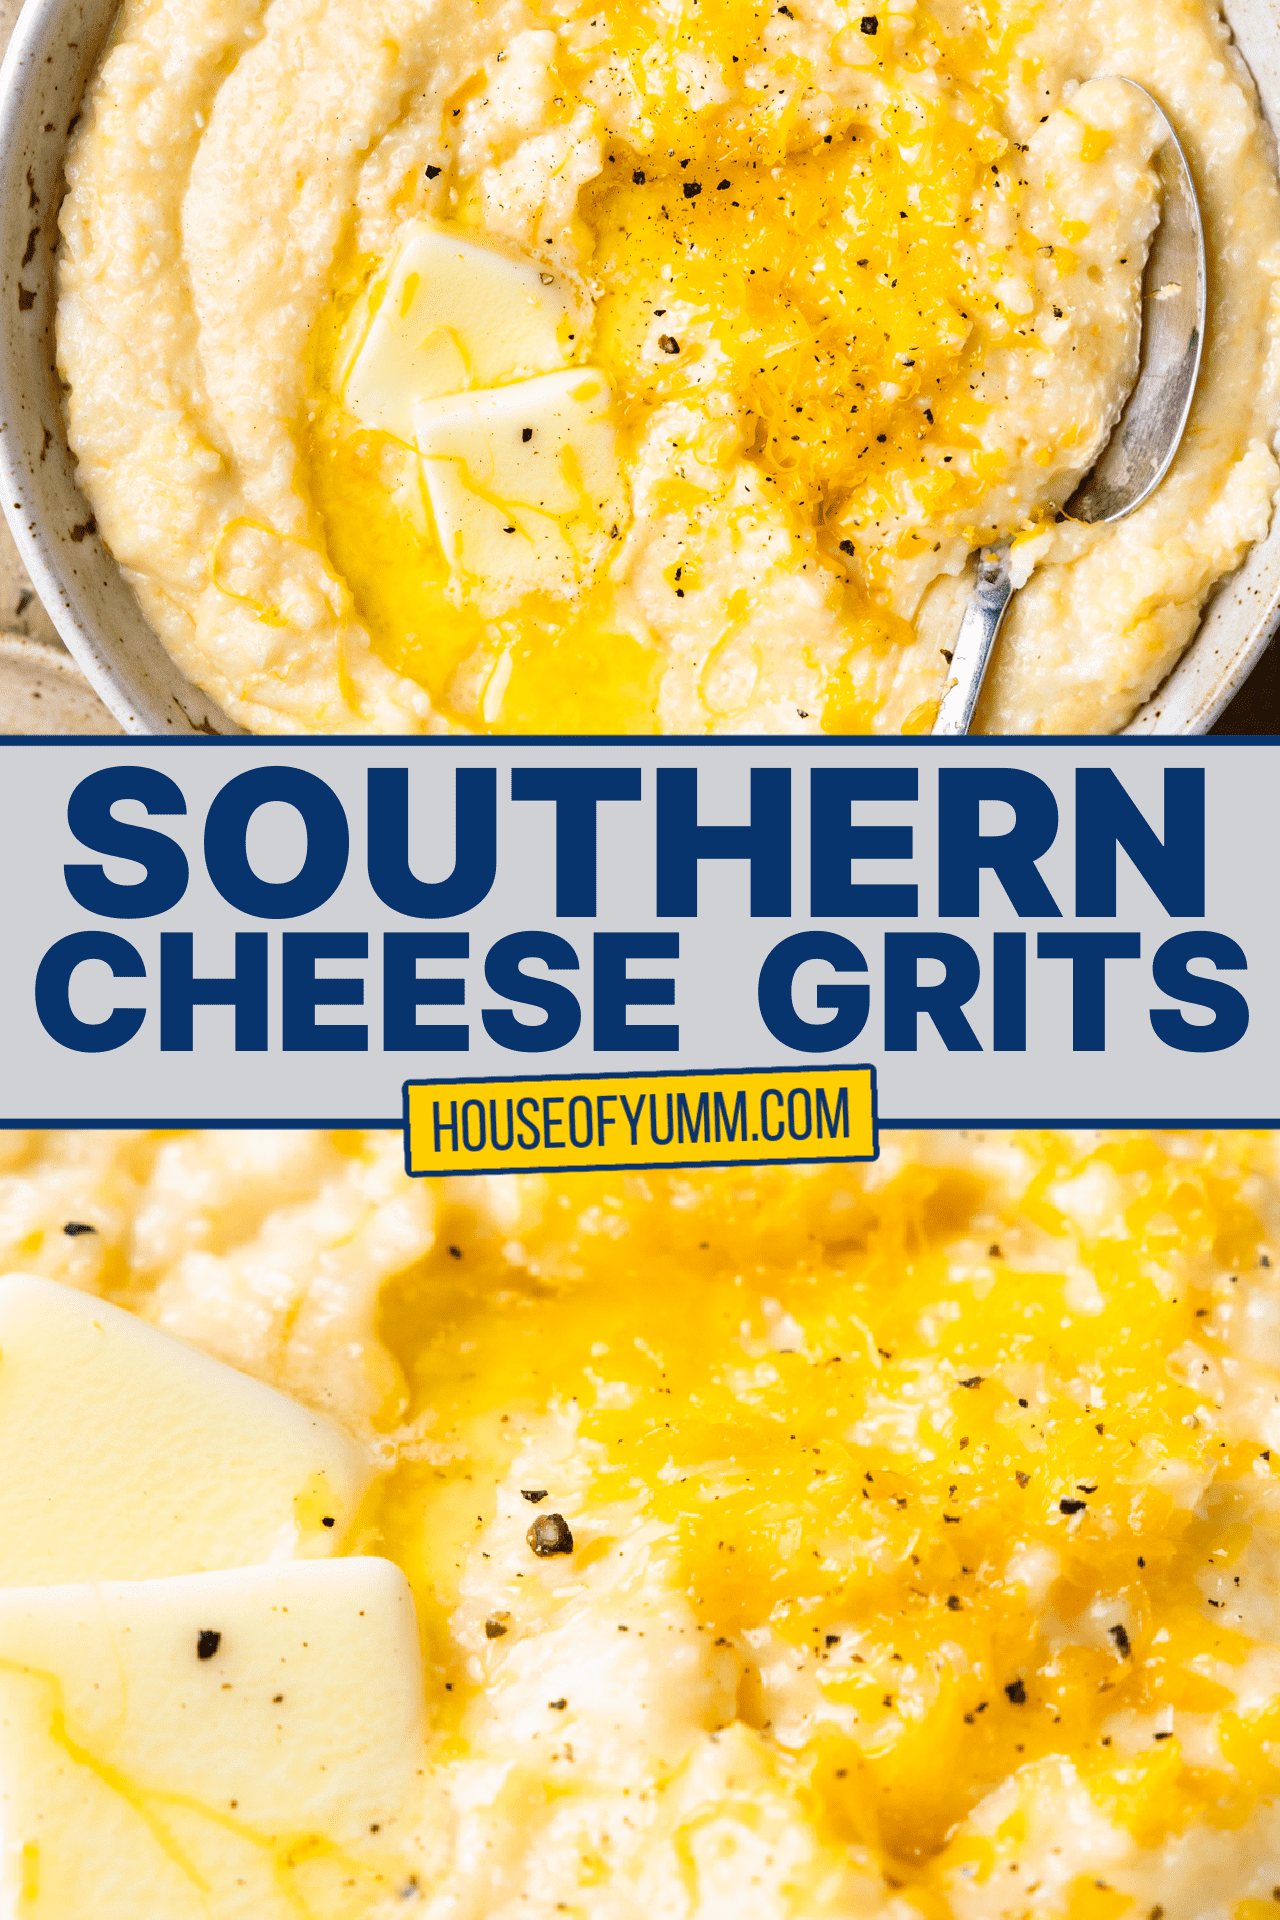 Southern Cheese Grits - House of Yumm